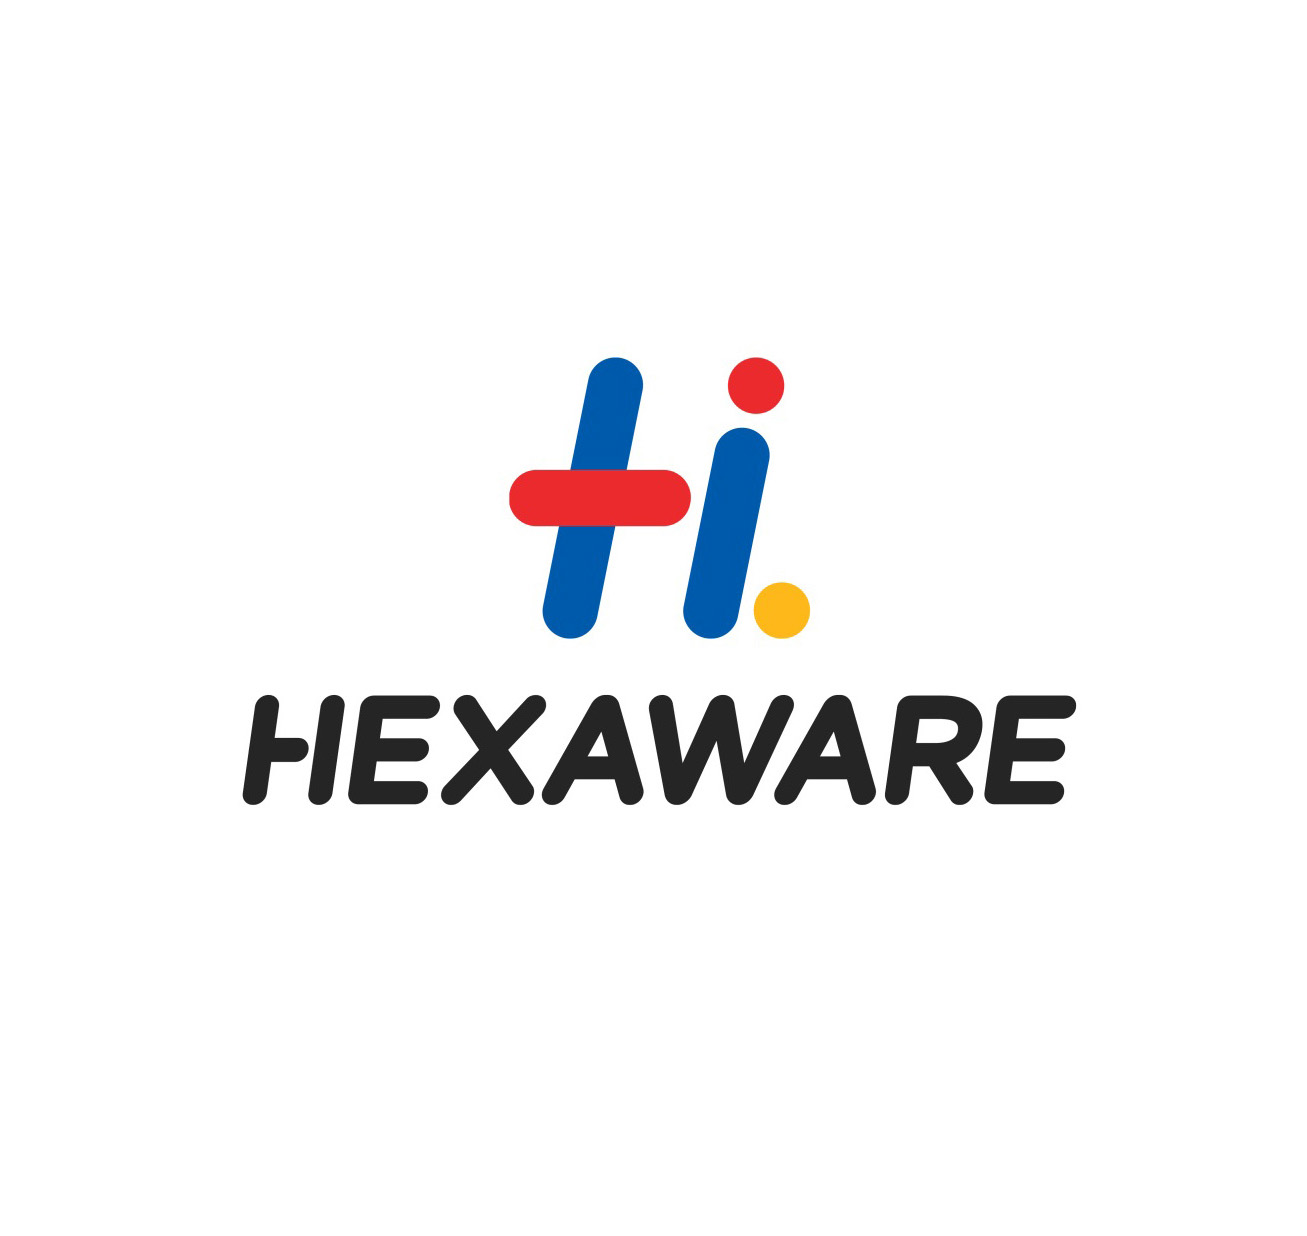 Hexaware Technologies Limited